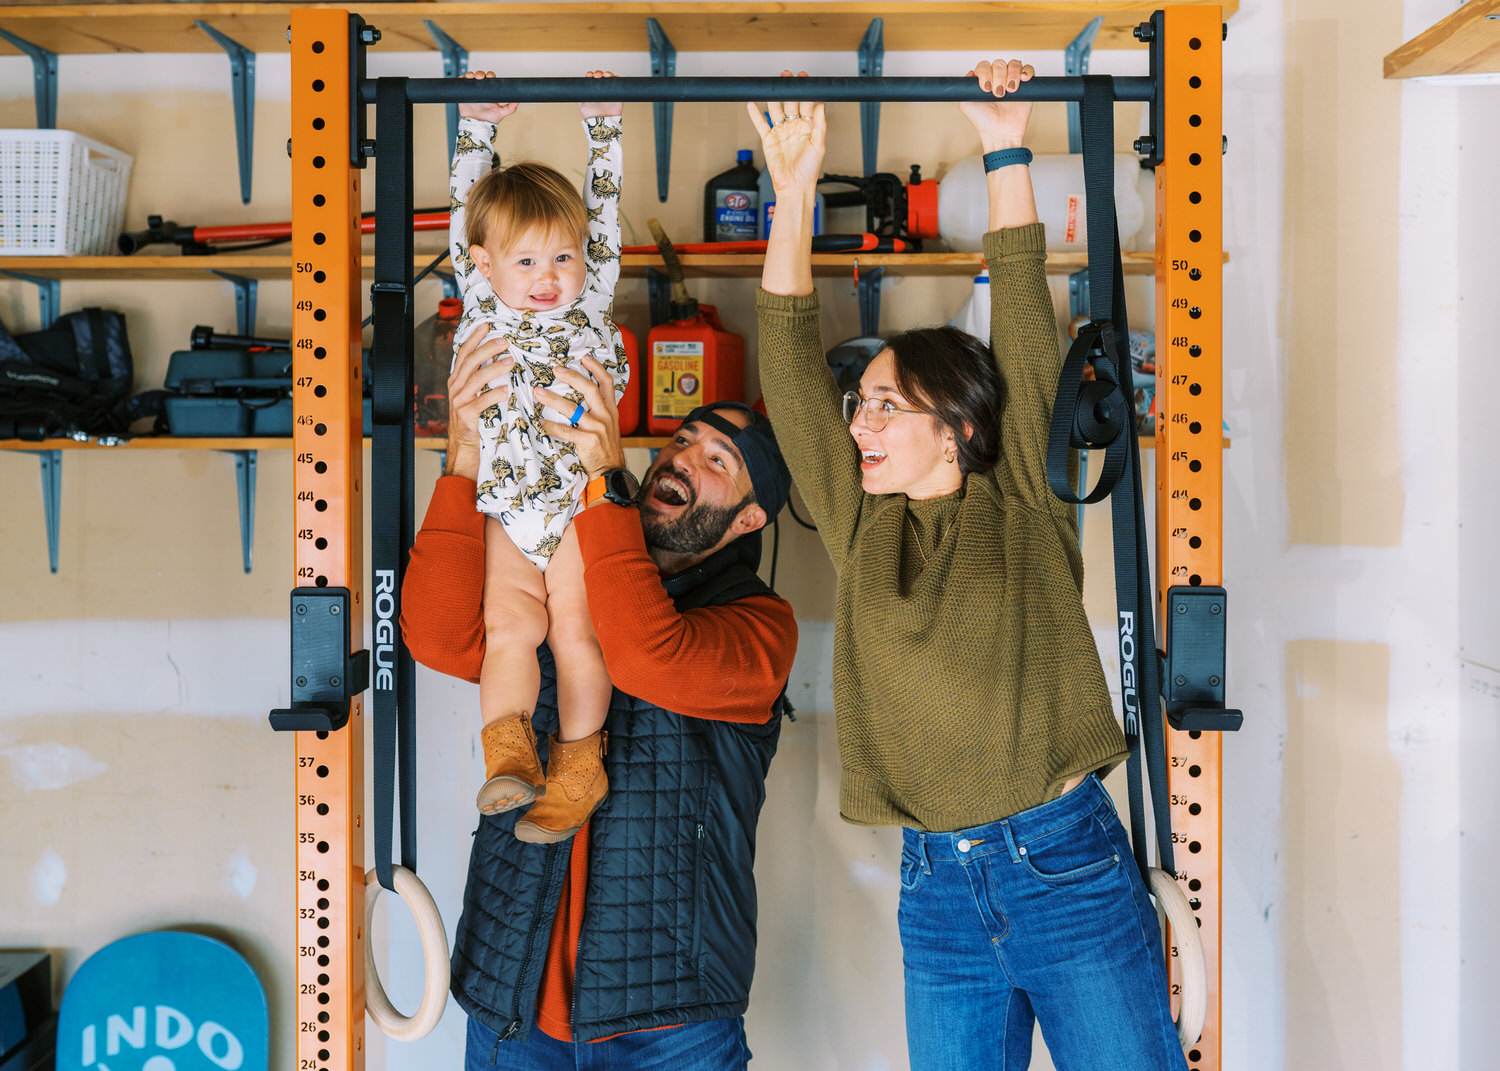 A toddler girl is lifted onto a pull-up bar by her dad, while her mom cheers her on